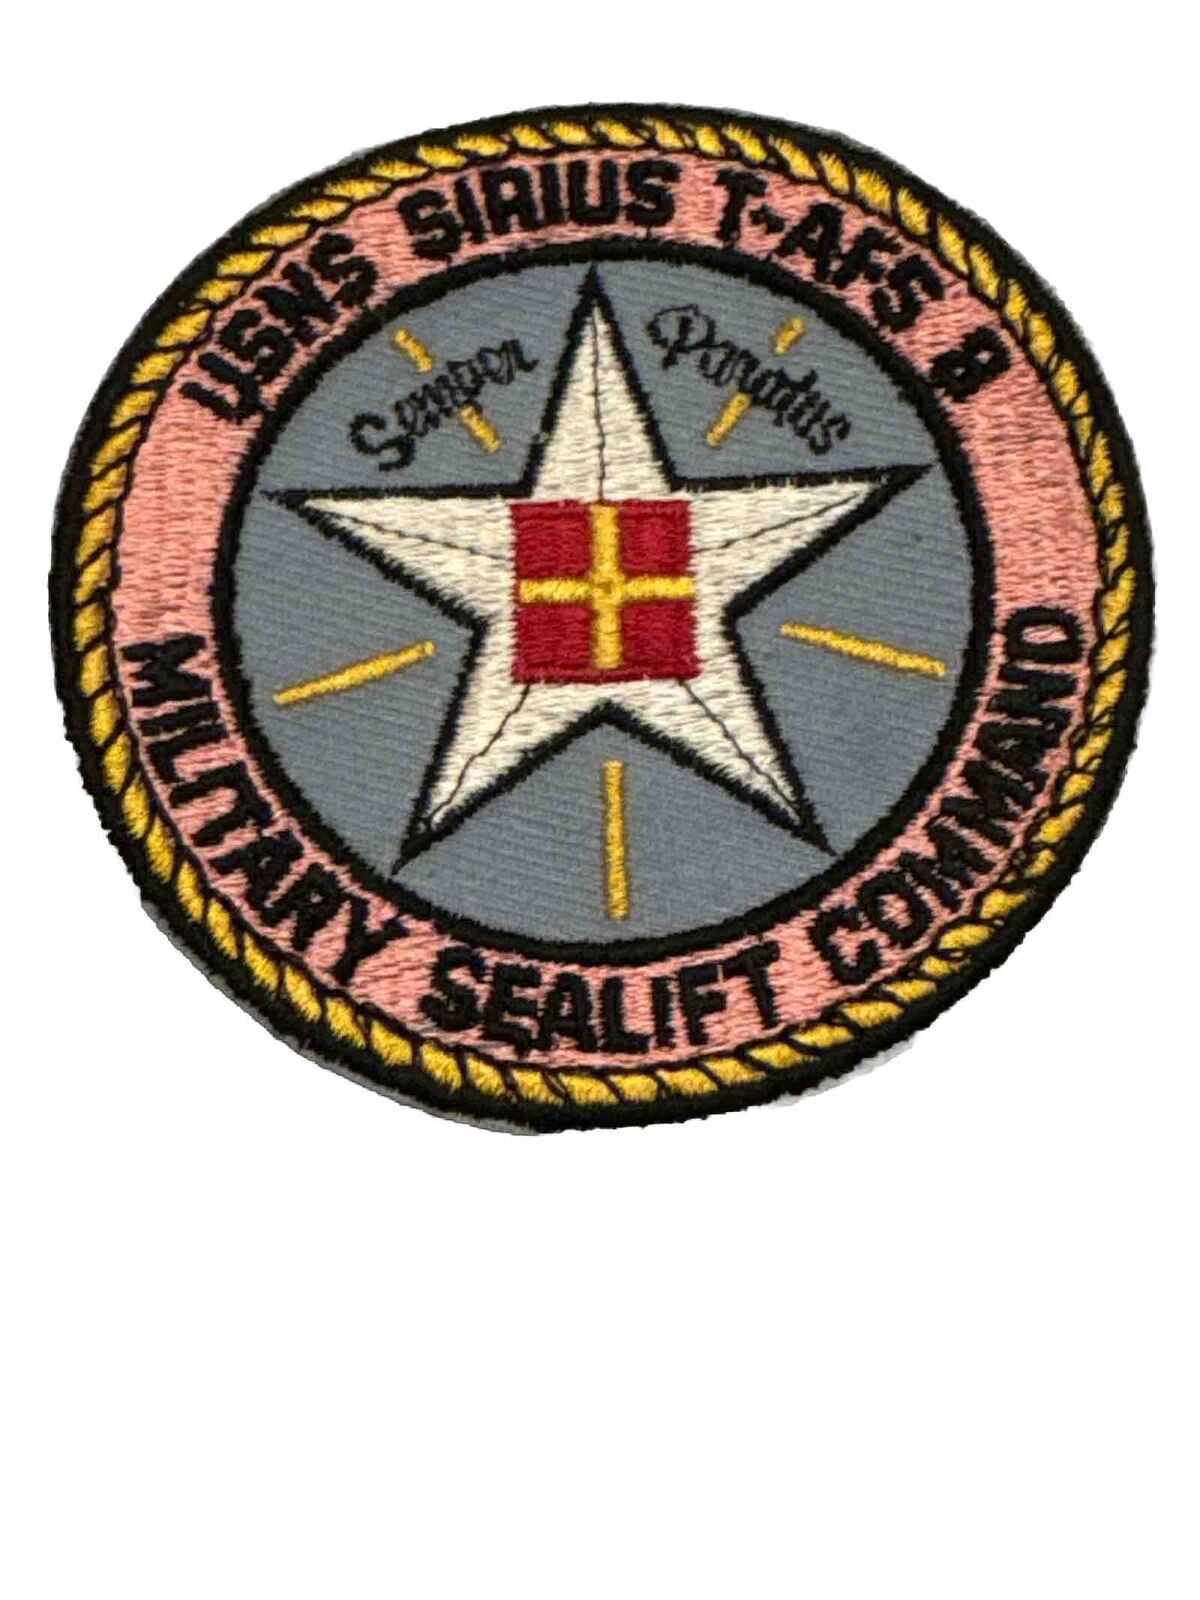 USNS Patch Sirius T-AFS 8 Military Sealift Command Embroidered Badge Vintage